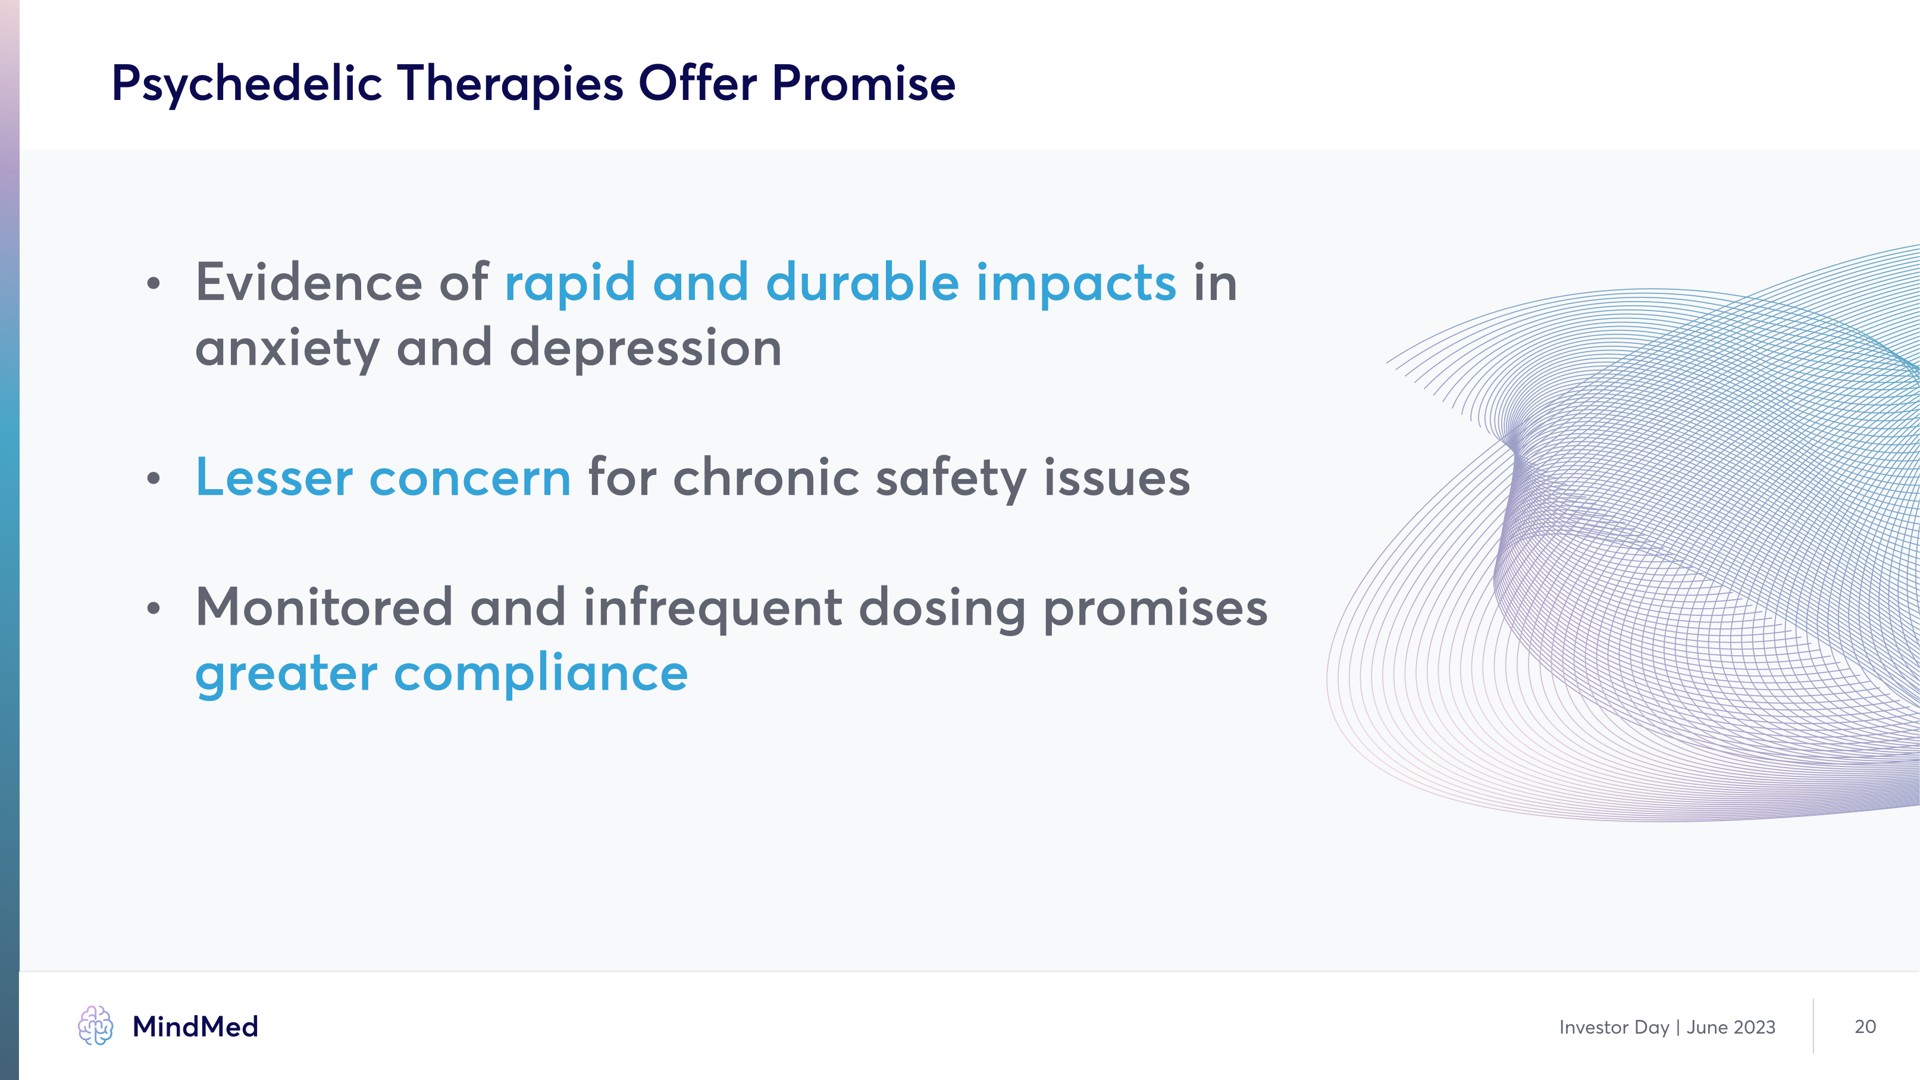 therapies offer promise evidence of rapid and durable impacts in anxiety and depression lesser concern for chronic safety issues monitored and infrequent dosing promises greater compliance | MindMed